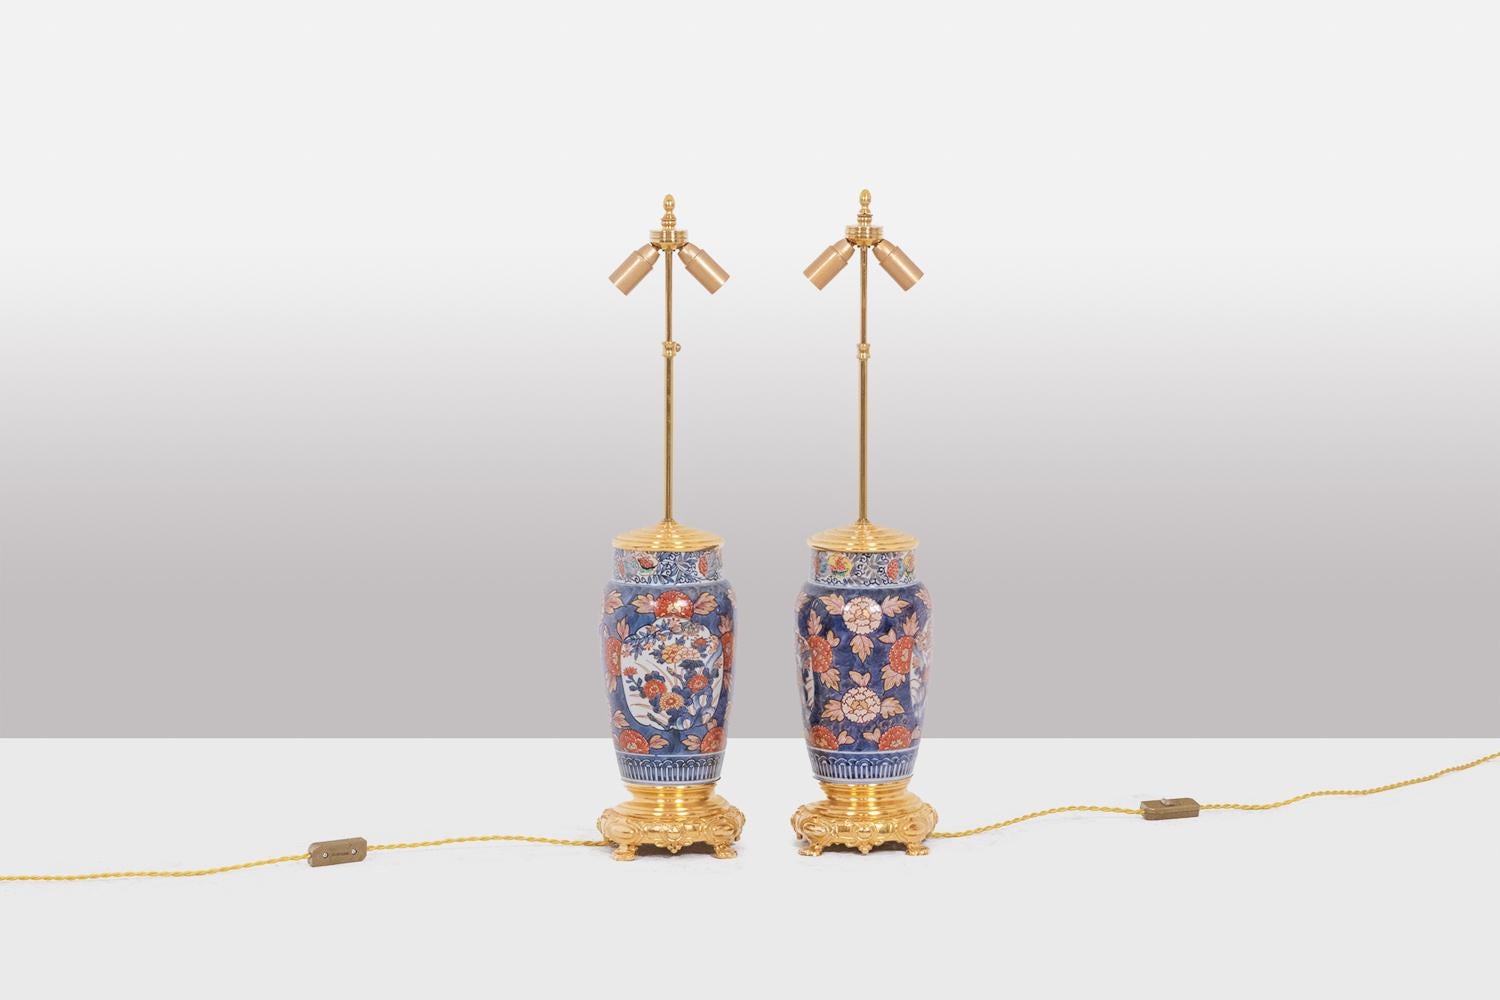 Pair of lamps in Imari porcelain and gilded bronze, decorated with flowers, the base decorated with cartouches and quadripod shape, the top of the frame decorated with concentric circles.

French work realized circa 1880.

Dimensions: H 57 x D 15